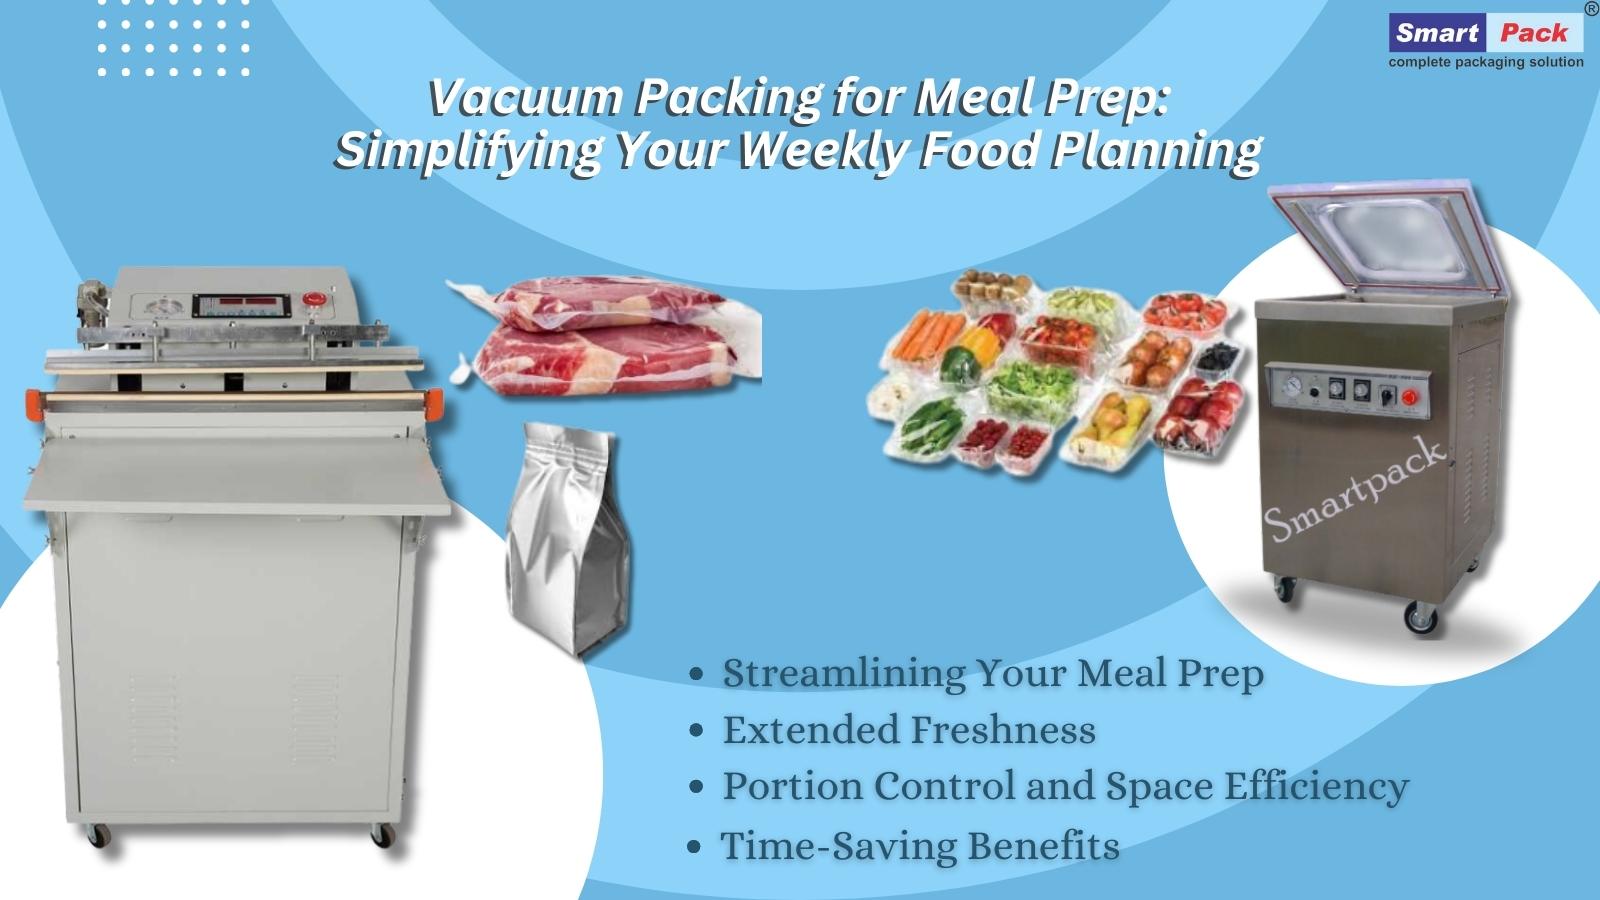 Vacuum Packing for Meal Prep: Simplifying Your Weekly Food Planning